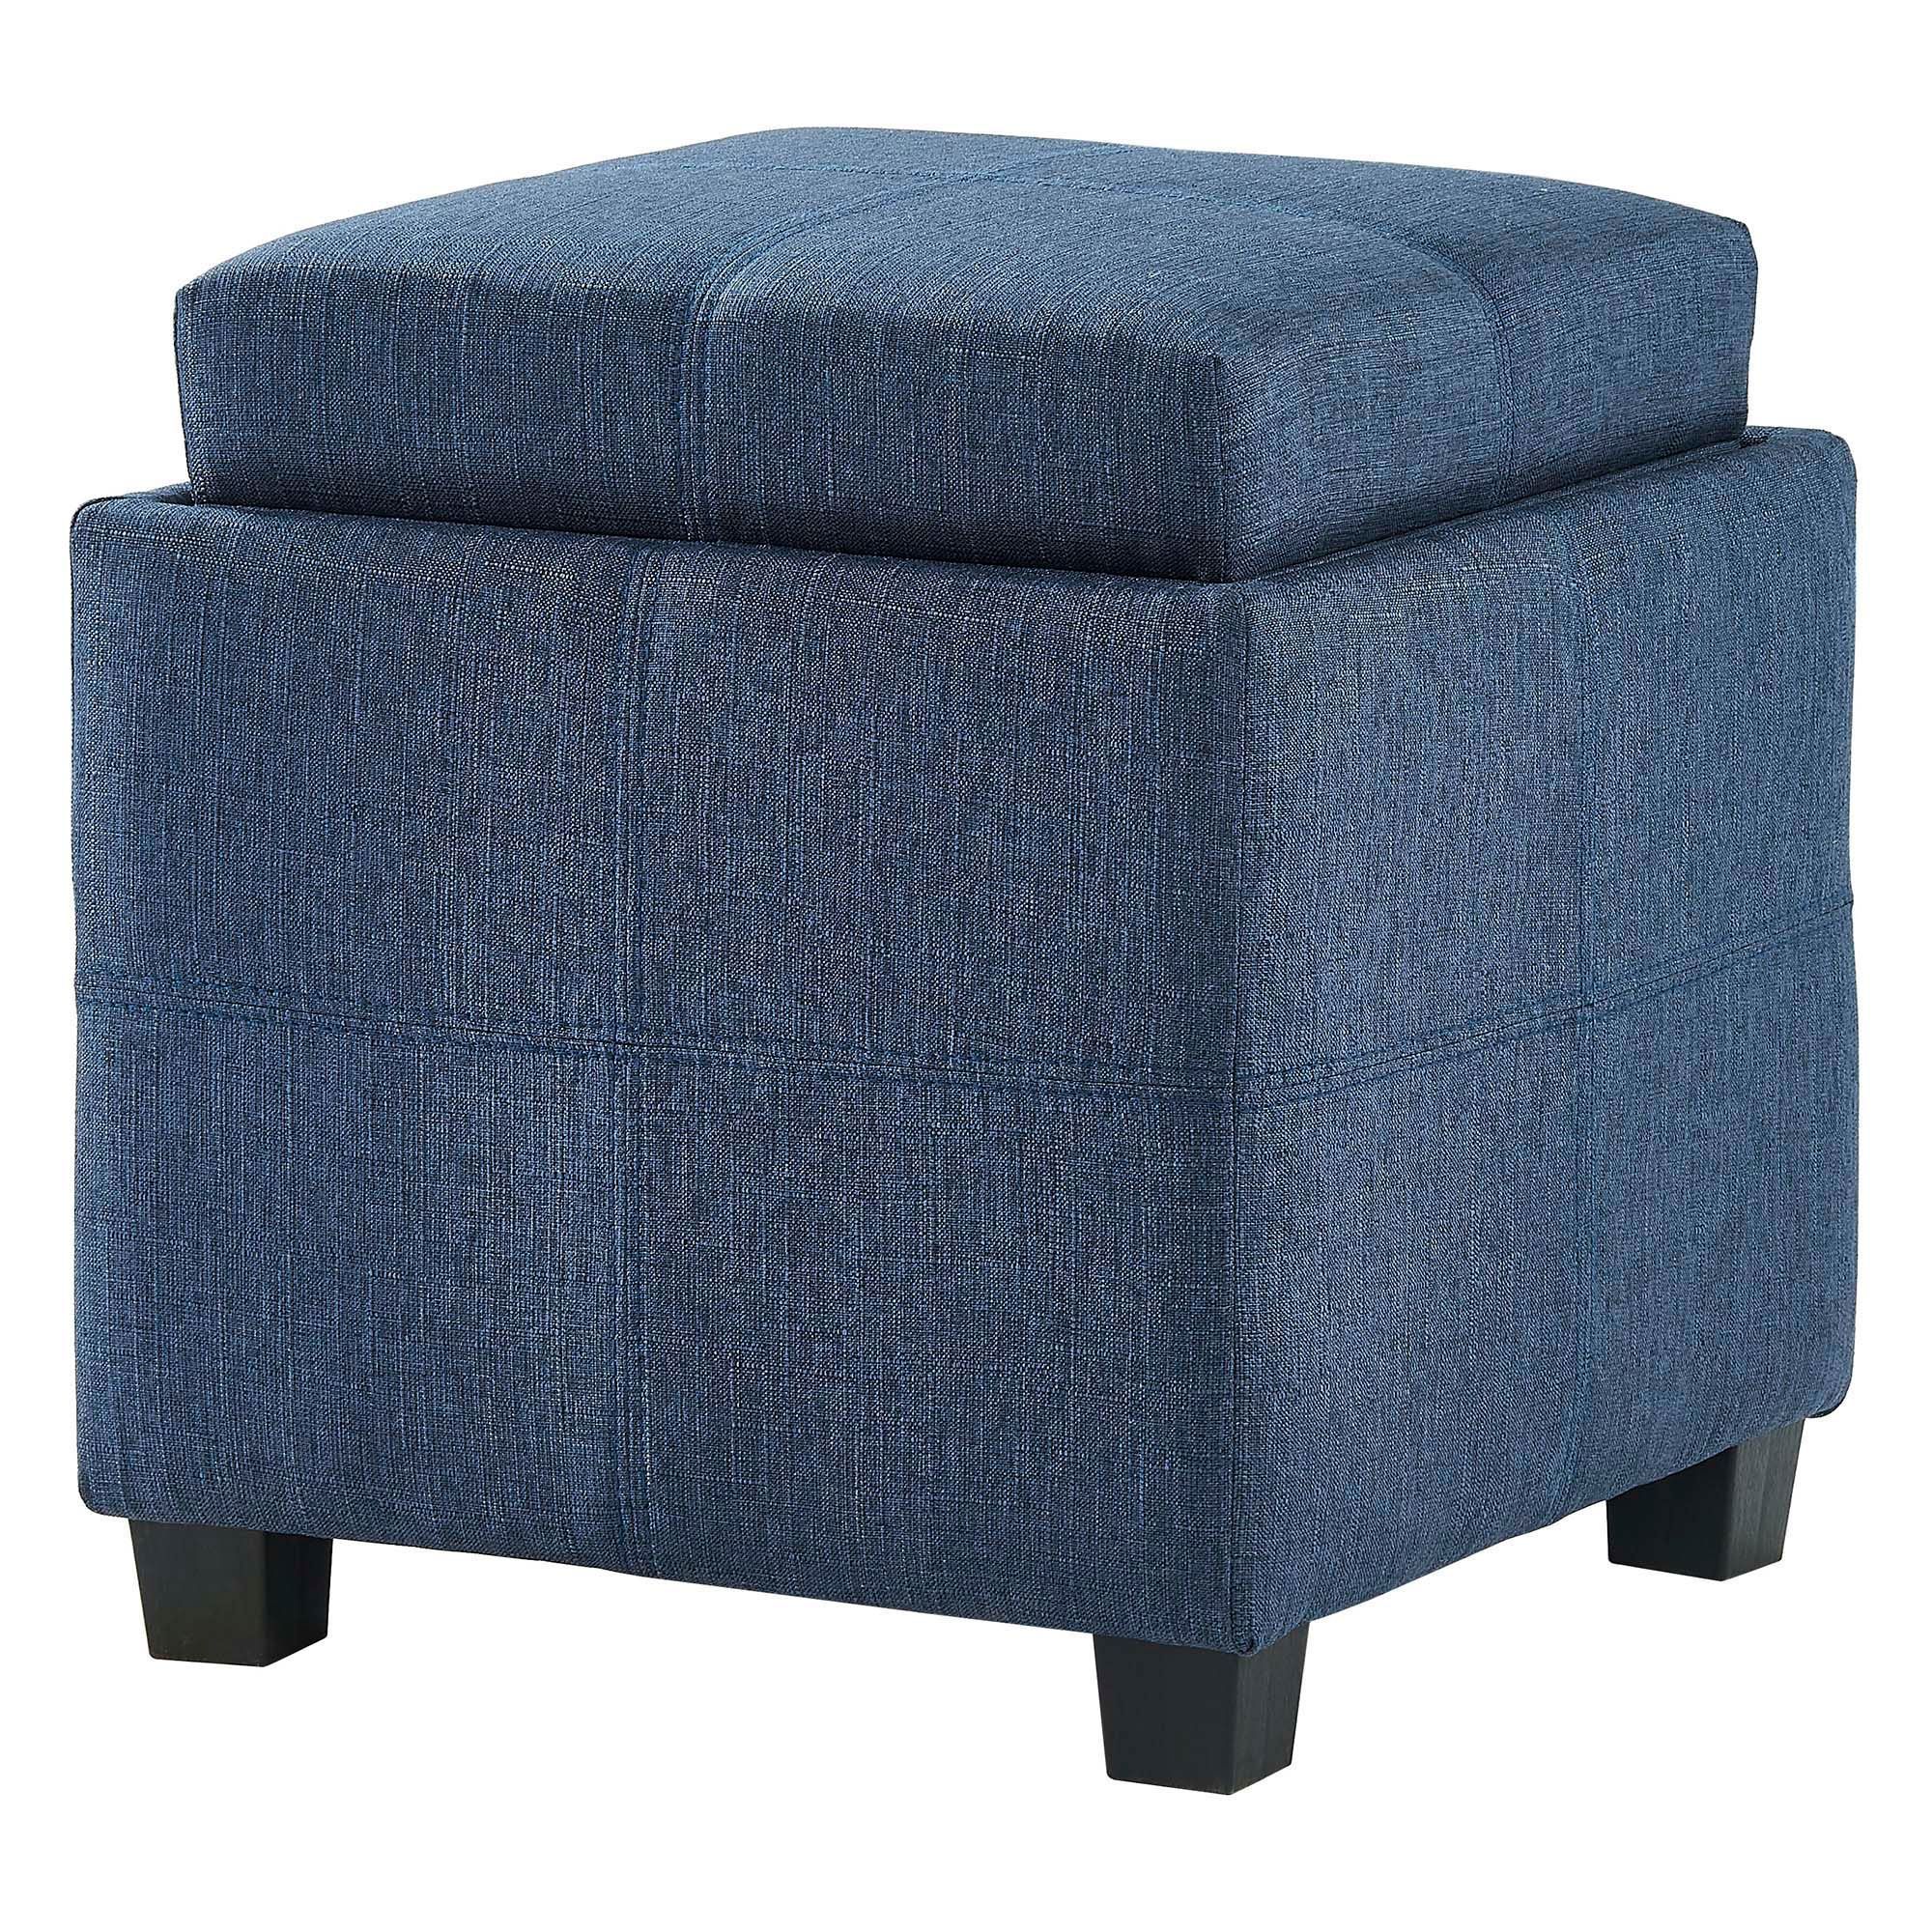 19" Blue And Gray Transitional Square Storage Ottoman With Reversible Regarding White Wool Square Pouf Ottomans (View 14 of 20)